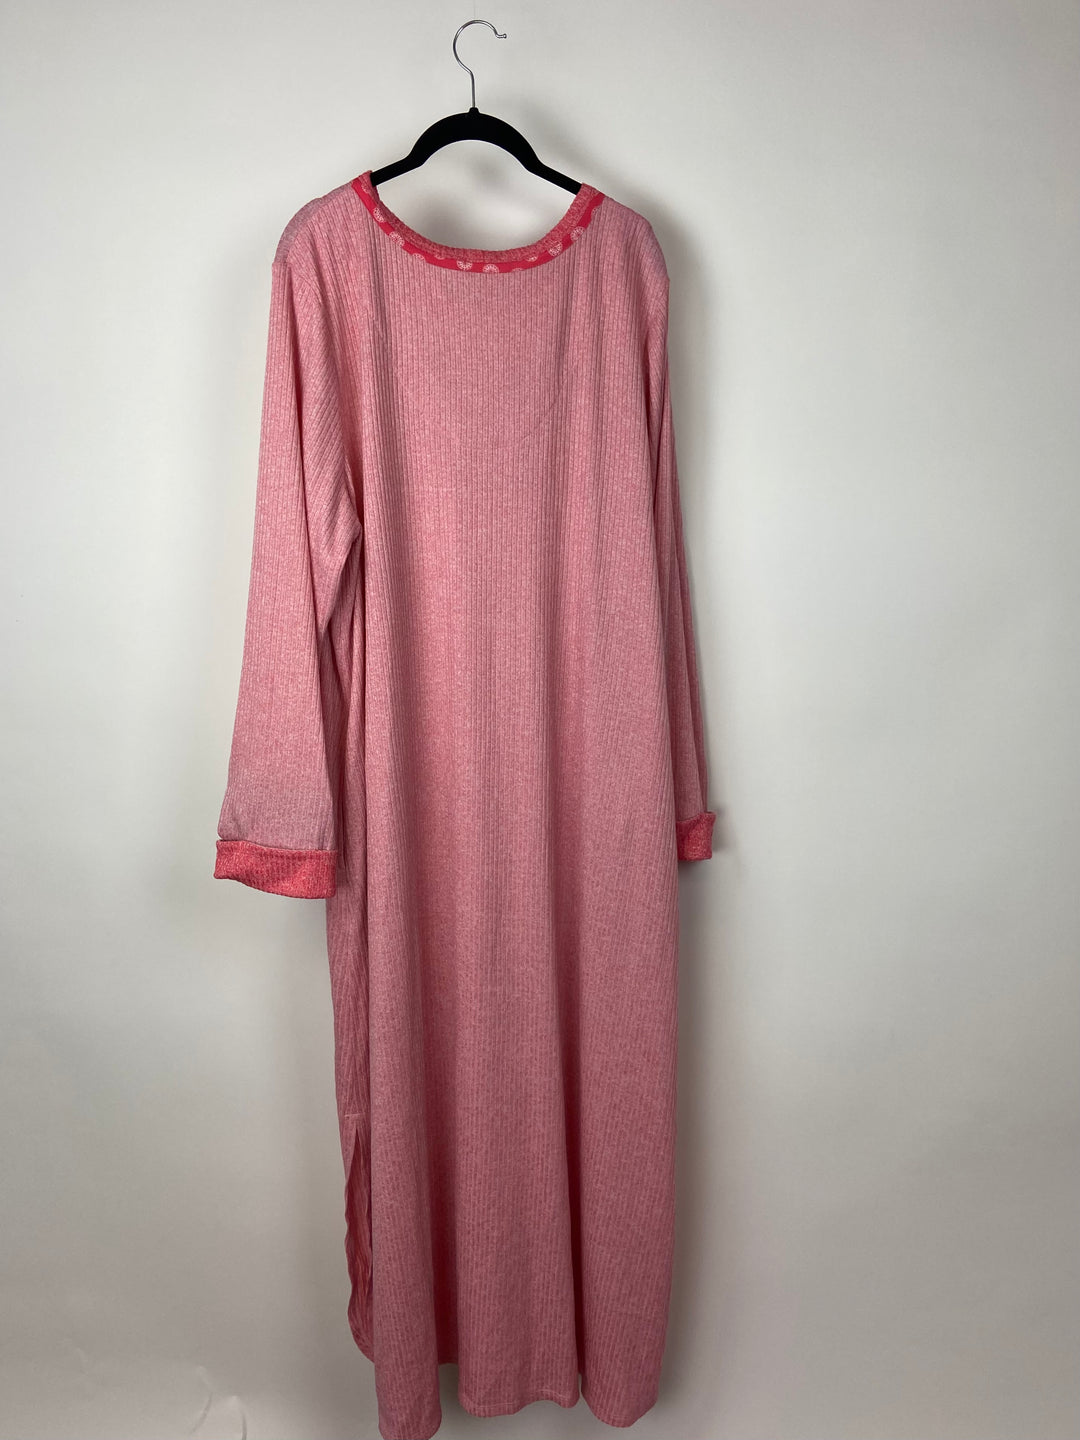 Pink and Coral Long Sleeve Dress - 2X